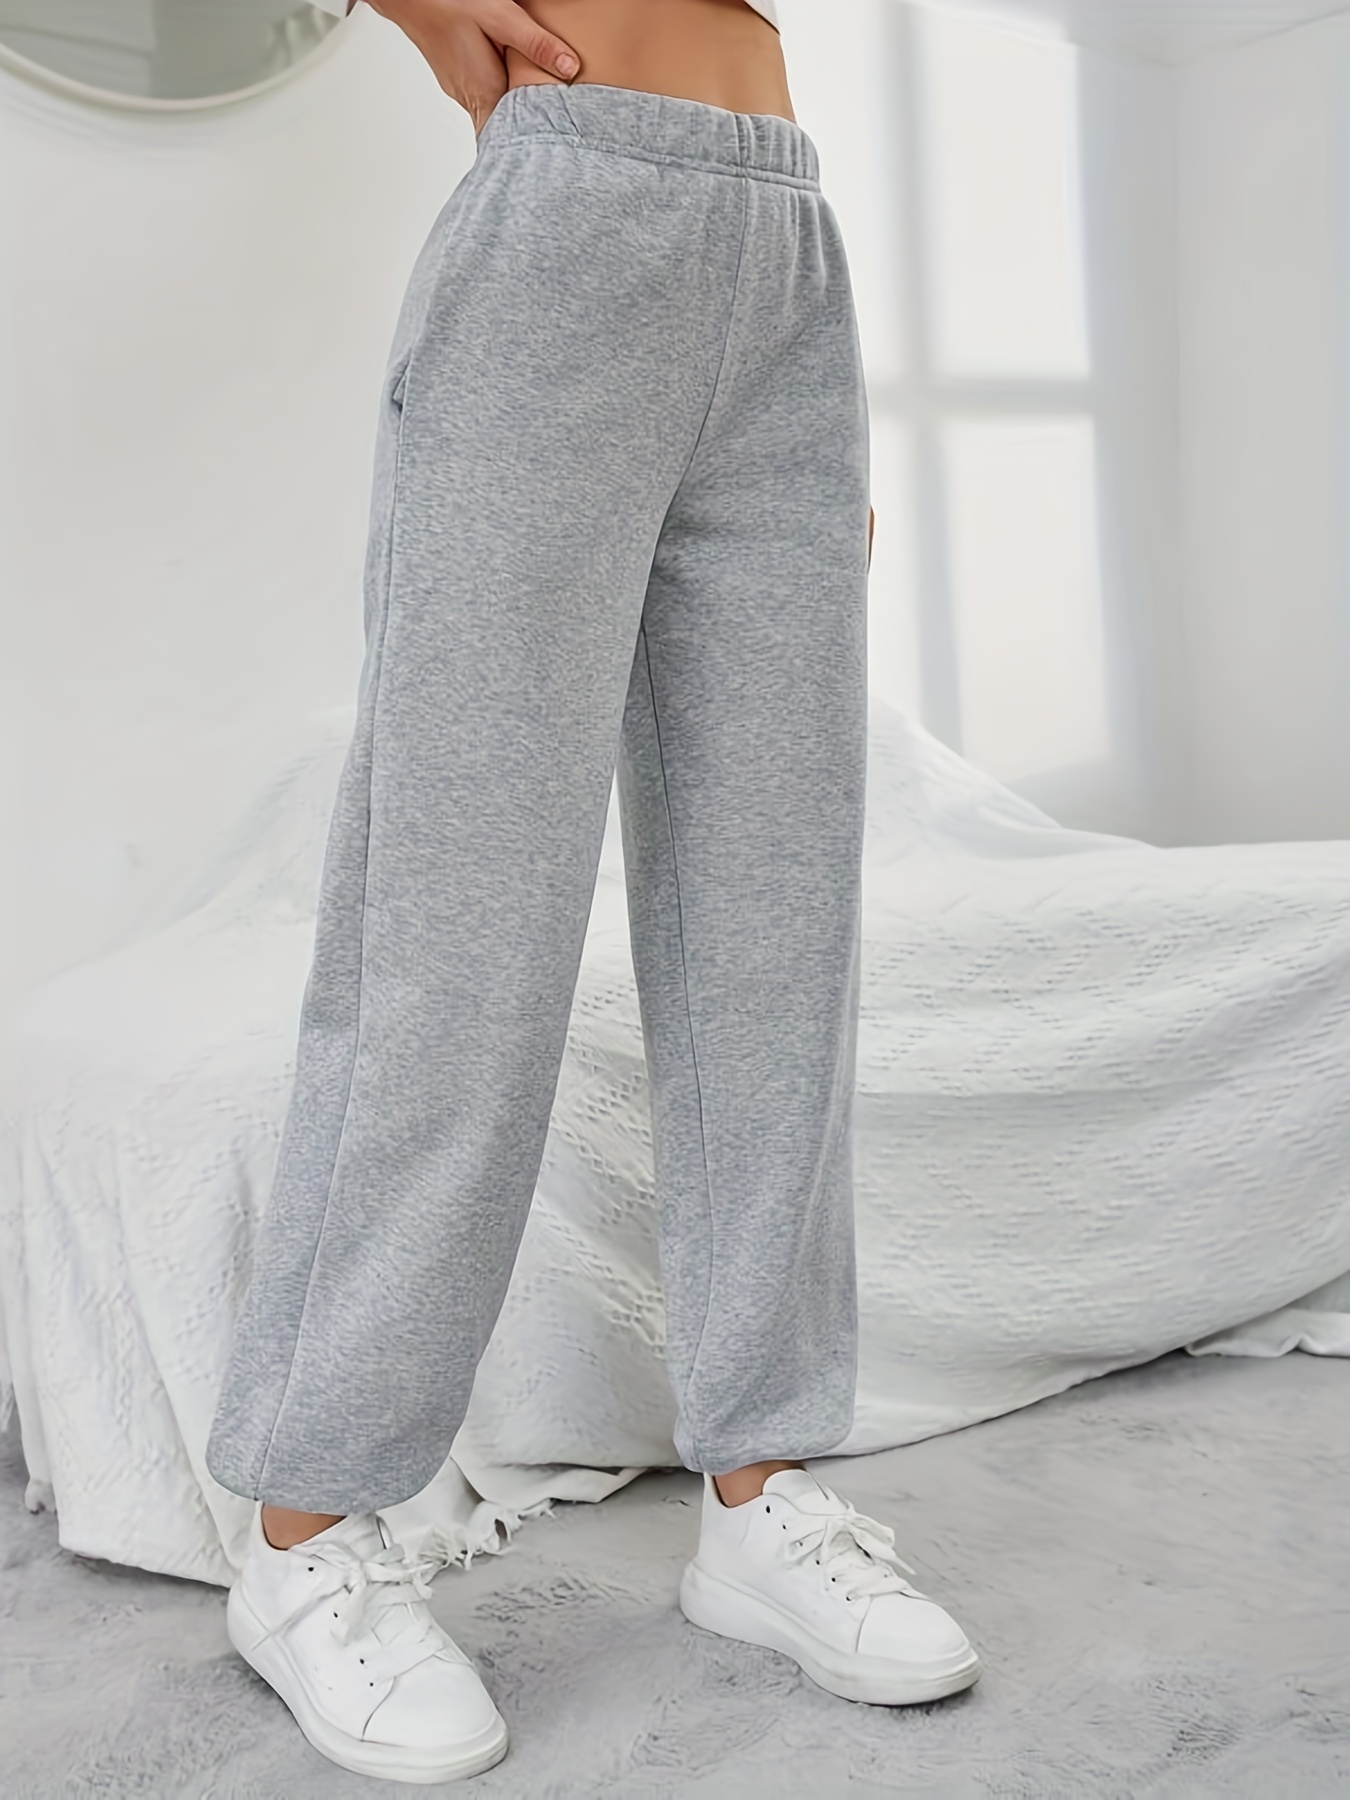 Plus Size Casual Pants, Women's Plus Solid Elastic High * Loose Fit Jogger  Sweatpants With Pockets